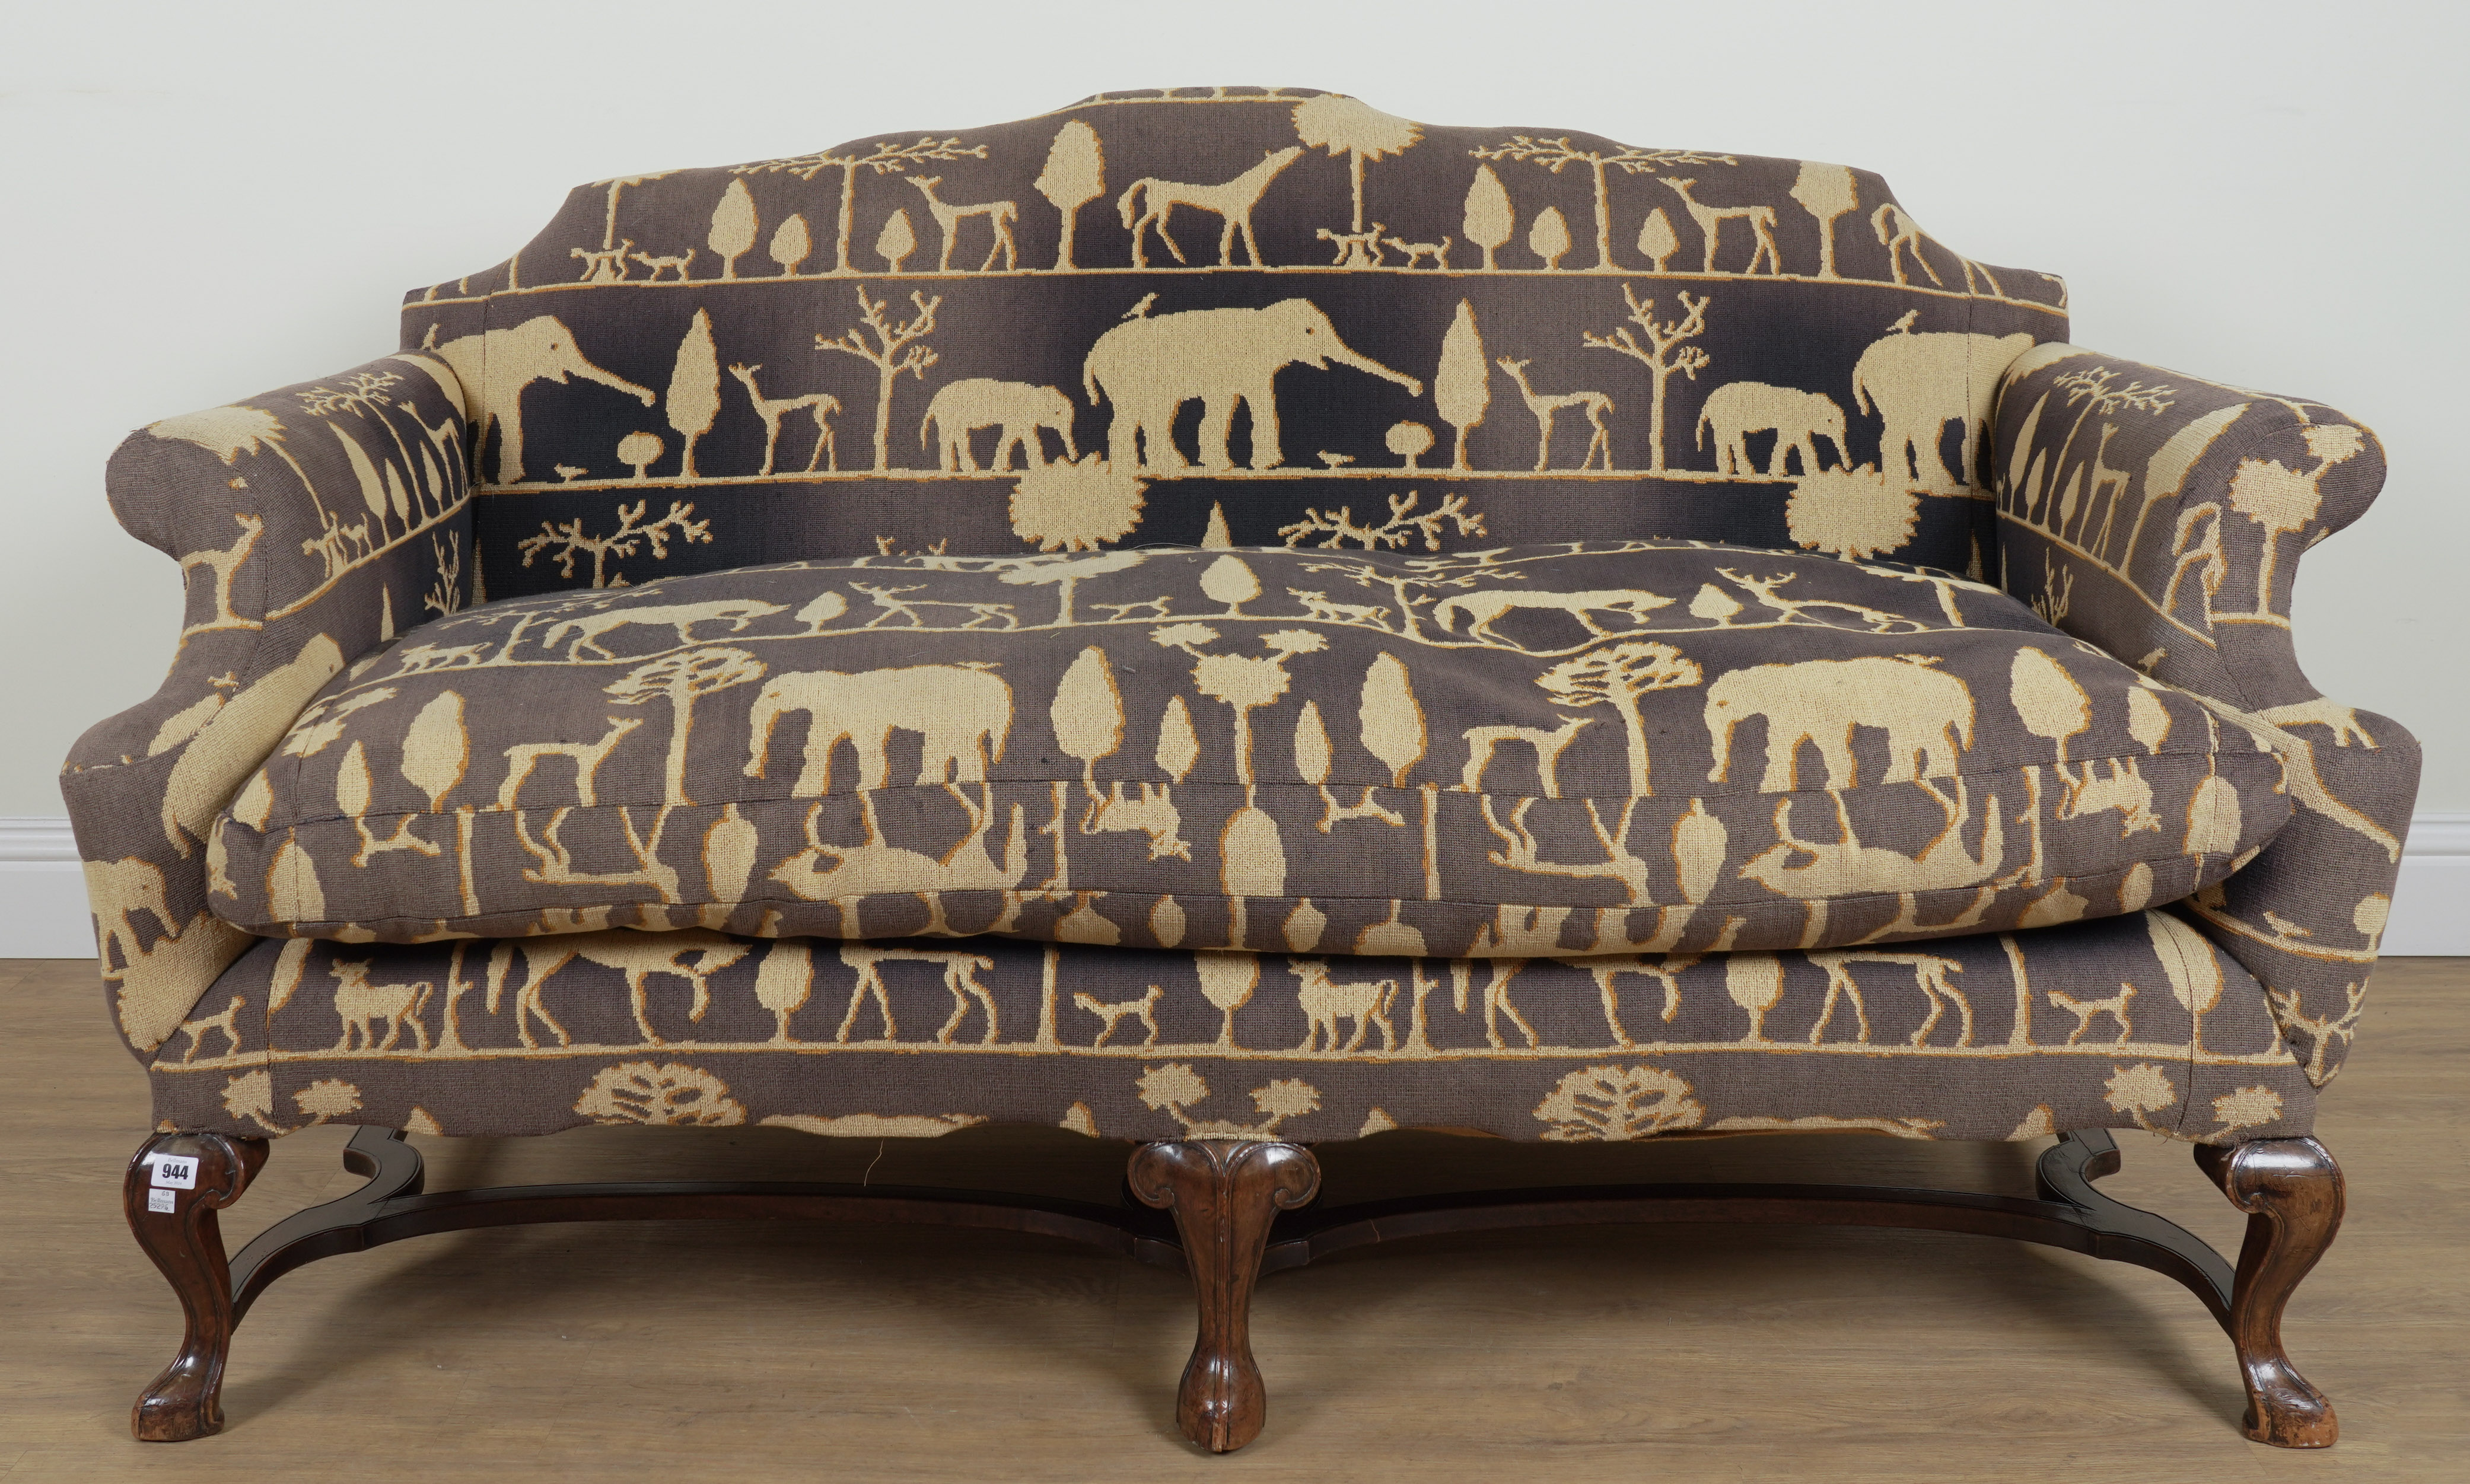 AN EARLY 18TH CENTURY STYLE HUMP BACK SOFA